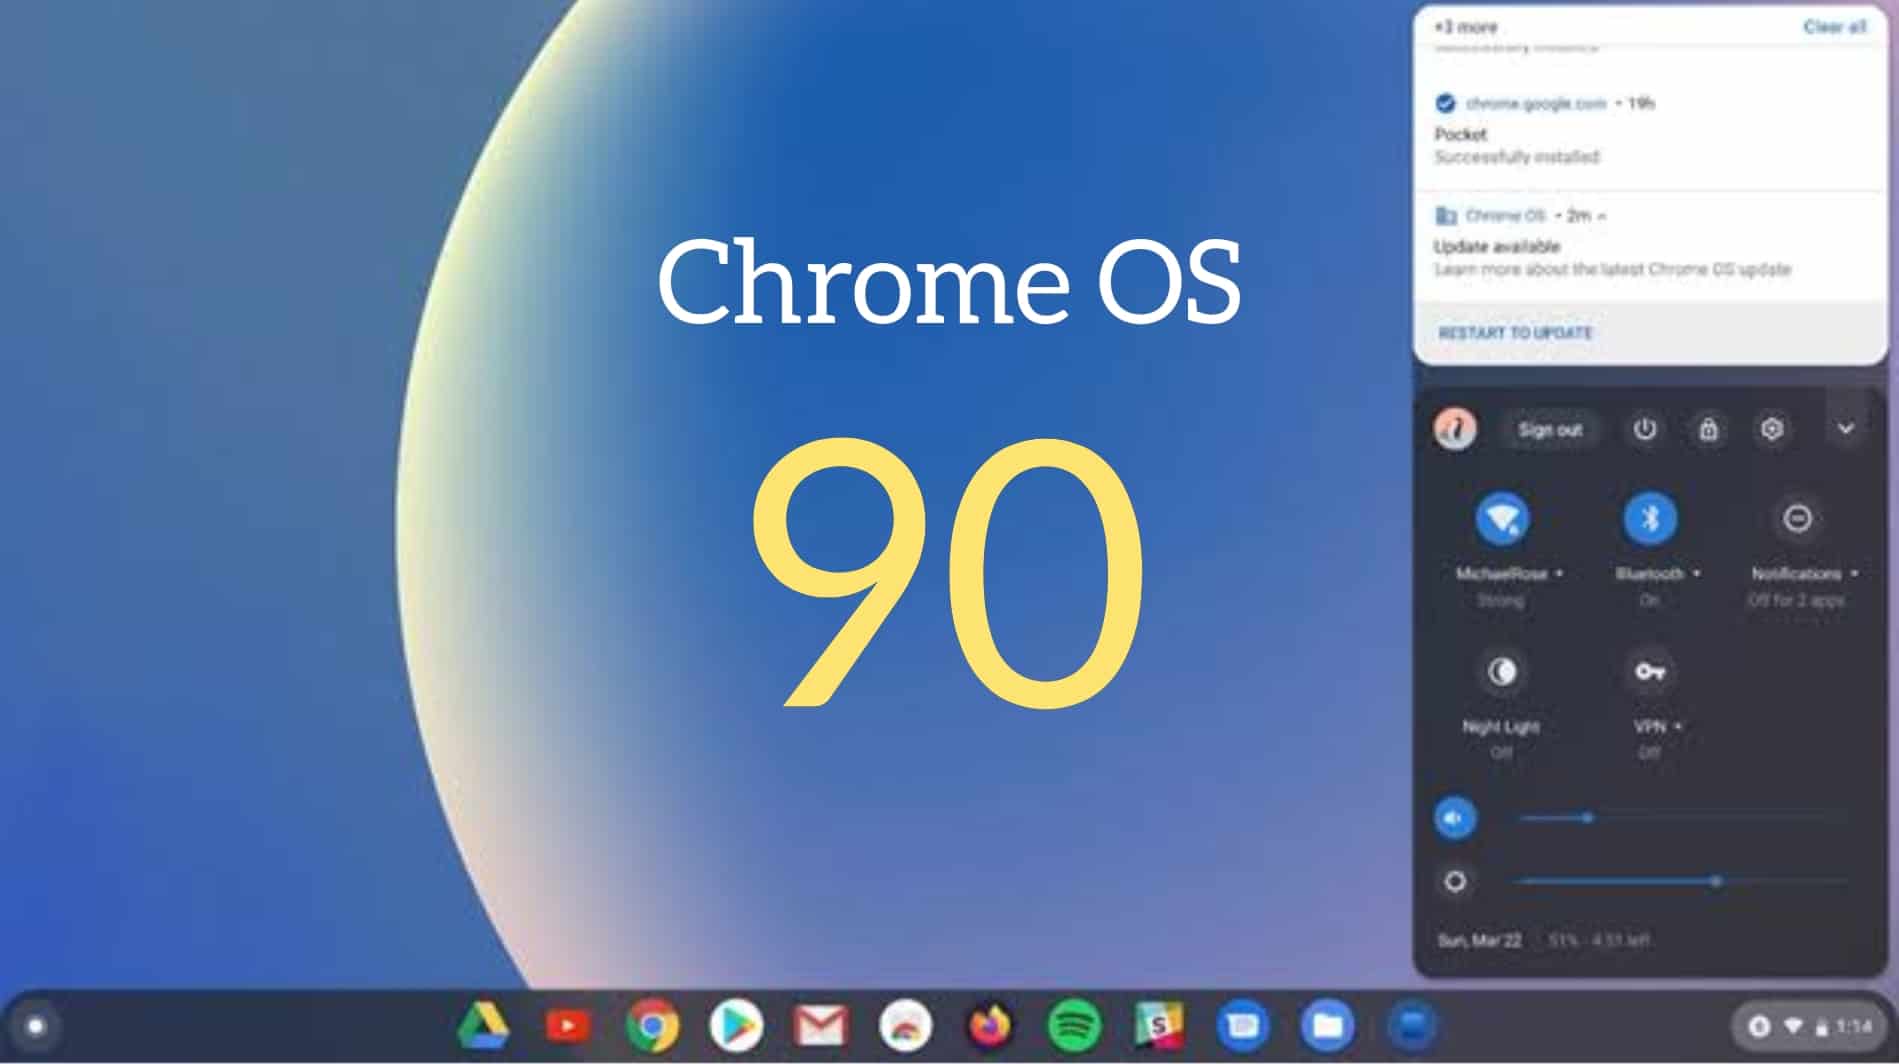 Google Releases Chrome OS 90 With Live Captions, Scan Tools, Diagnostics, and More